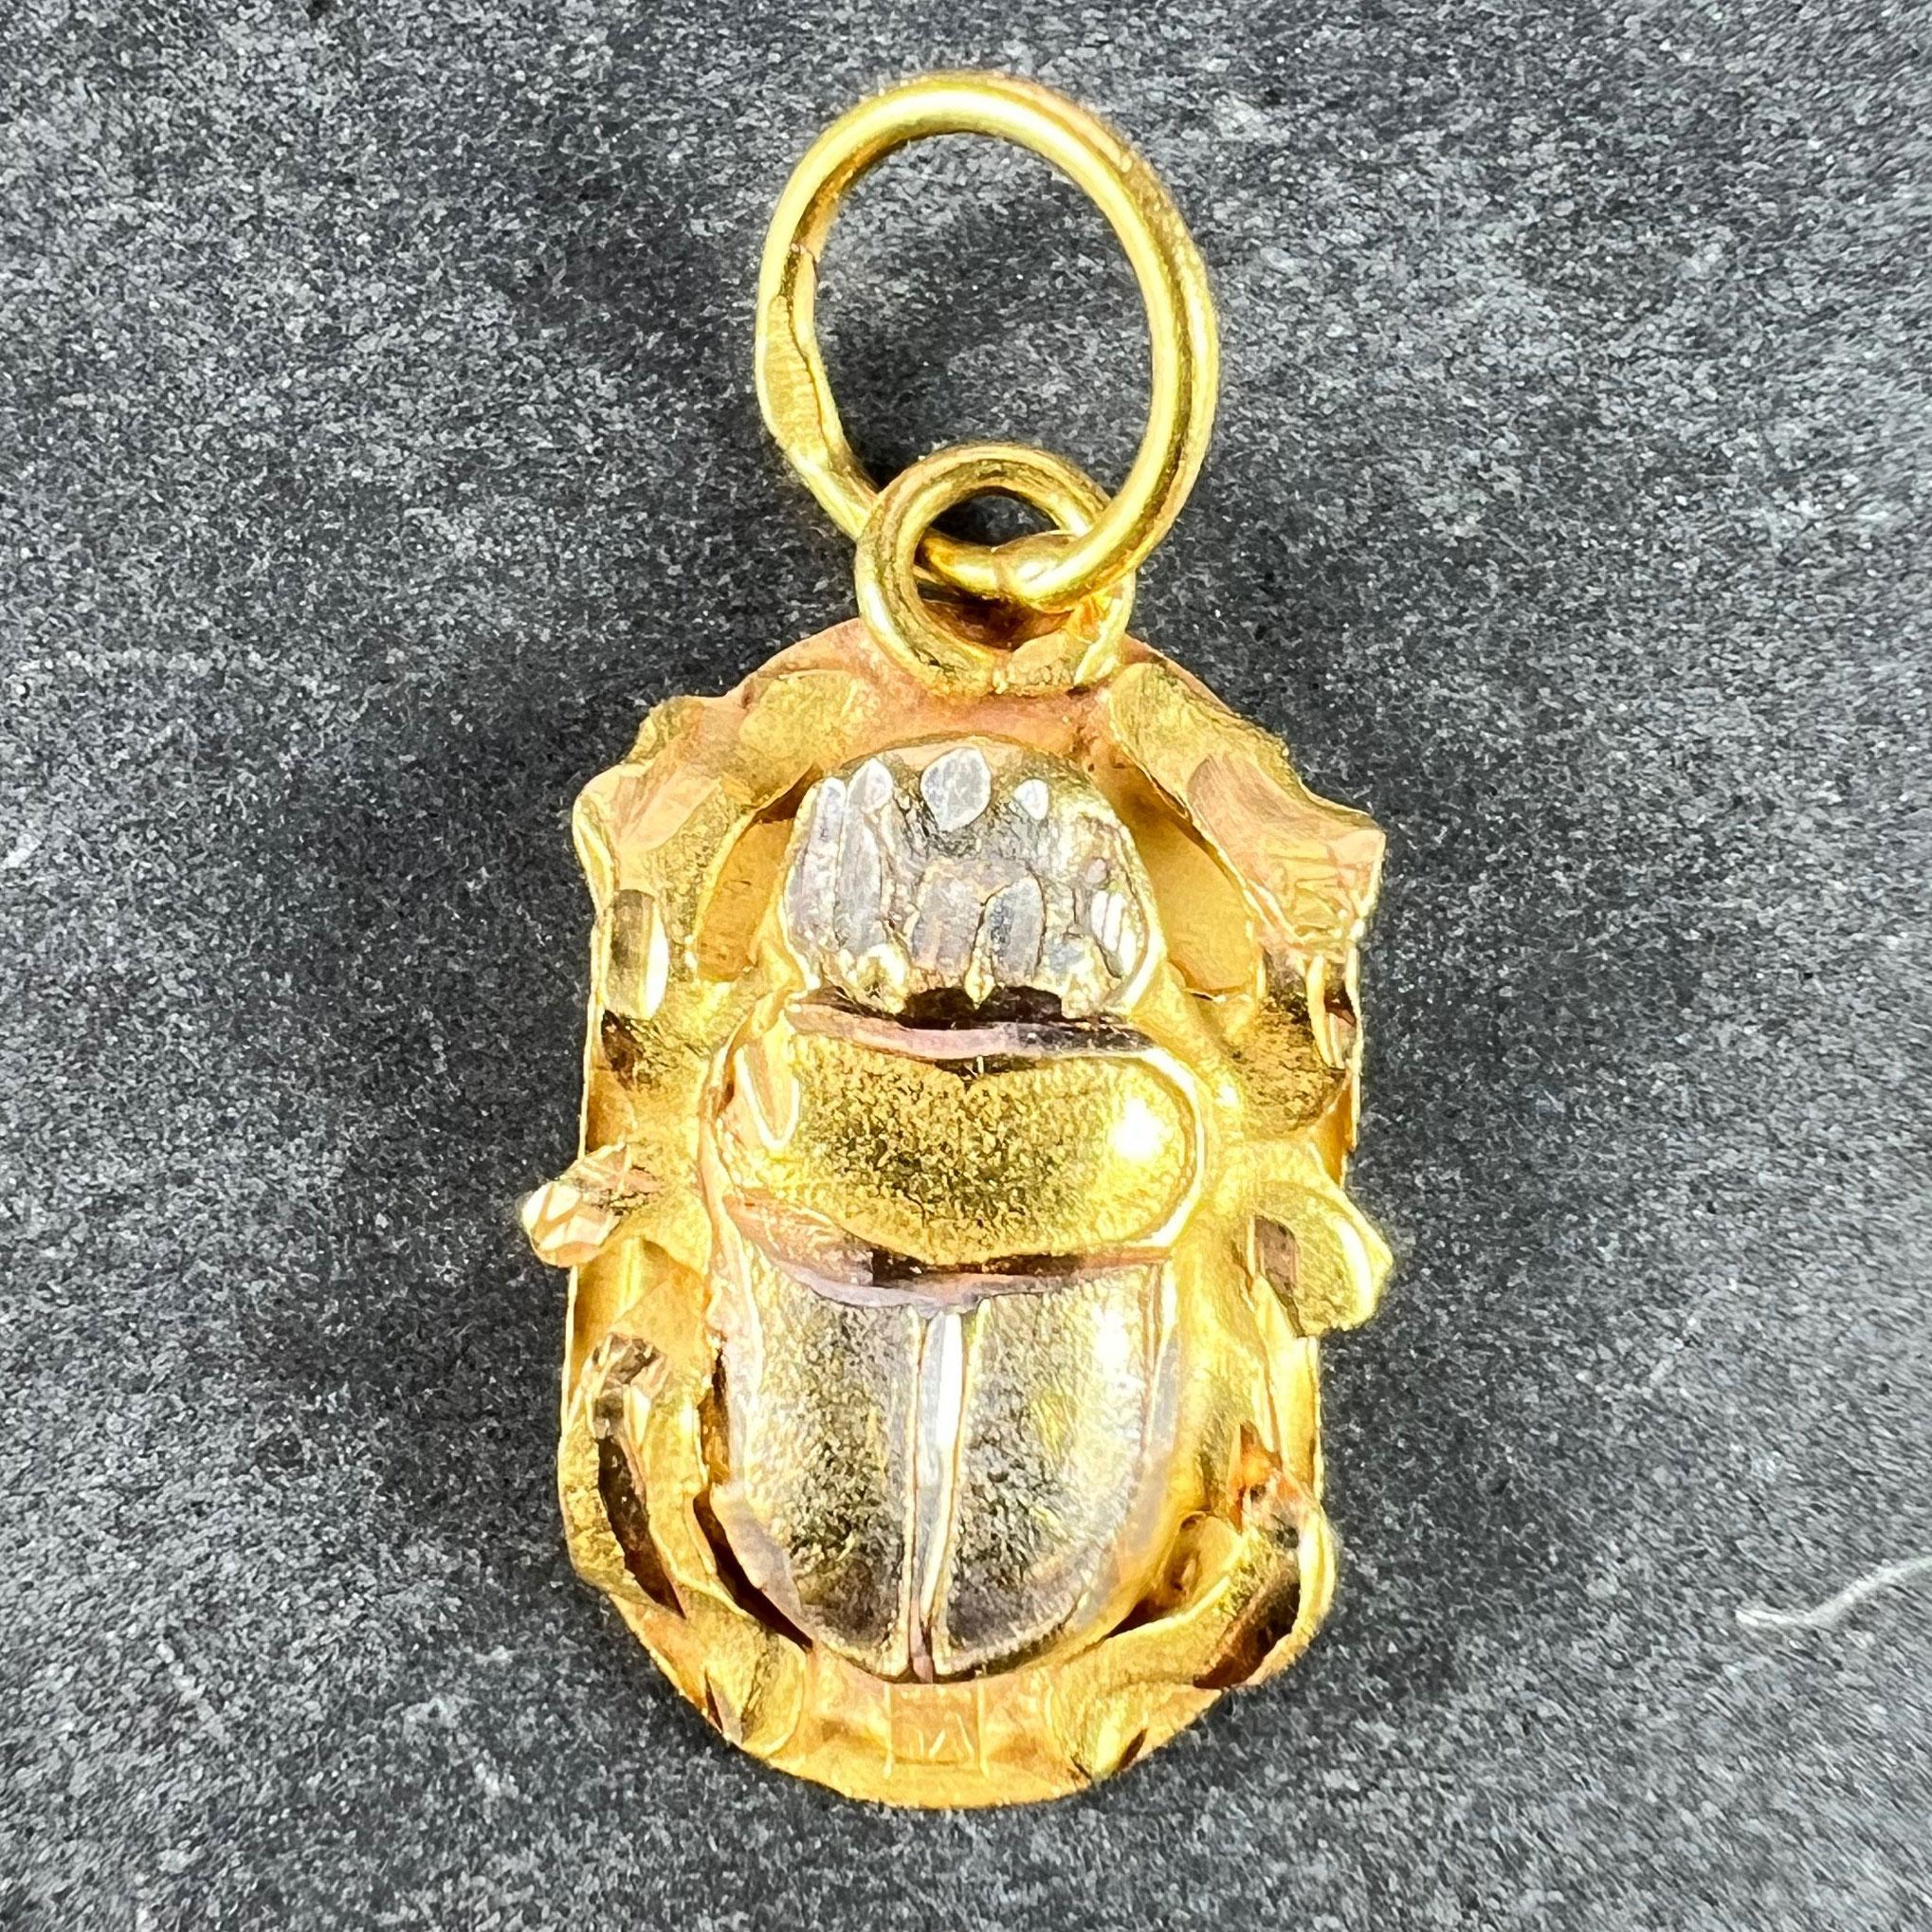 An Egyptian 18 karat (18K) yellow and white gold charm pendant designed as the protective amulet of an Egyptian scarab, with a relief of a scarab beetle holding up the sun to the reverse in a cartouche. Stamped with the Egyptian mark for 18 karat